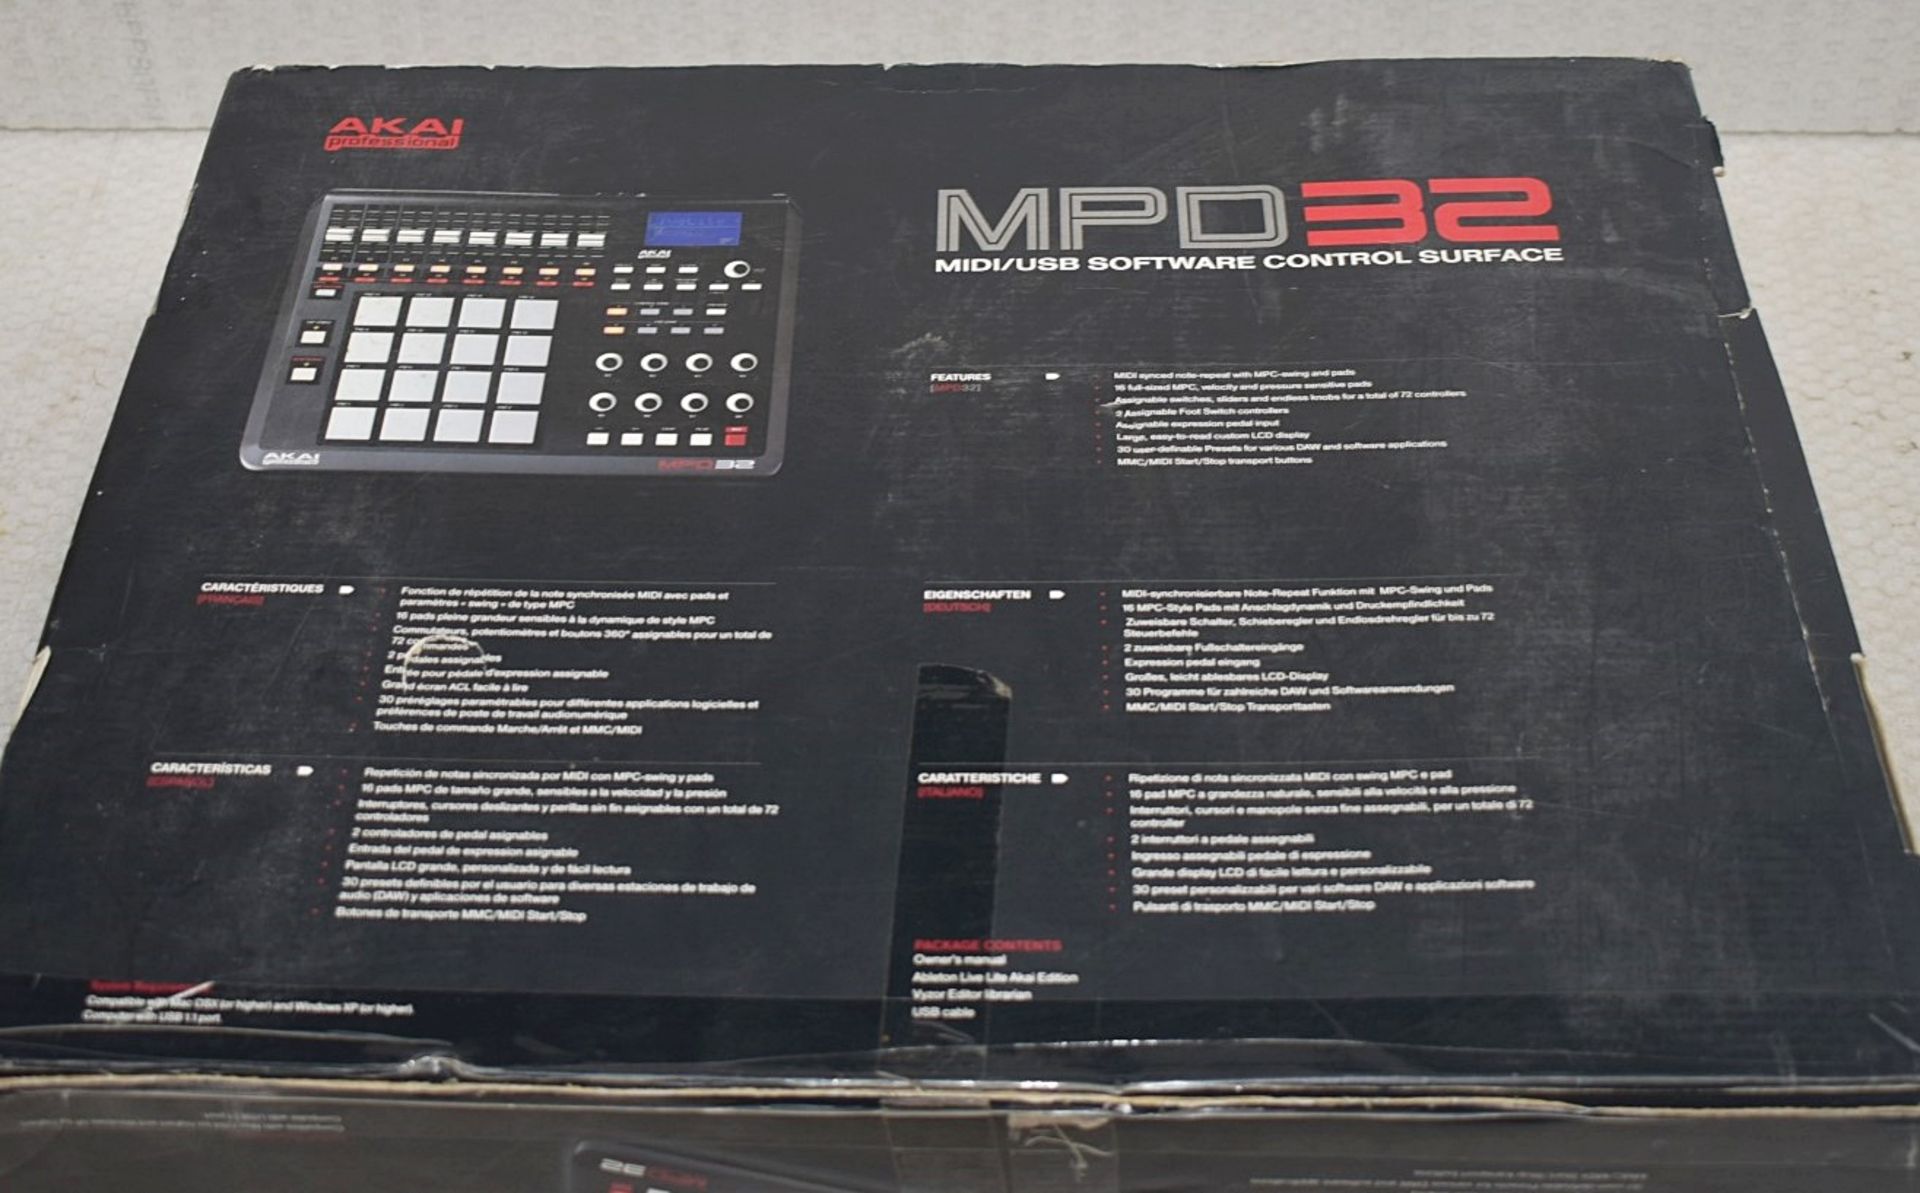 1 x AKAI Professional MPD32 USB/Midi MPC Pad Controller, Musicians and DJs - Ref: DS7606 ALT WH2 - - Image 9 of 10